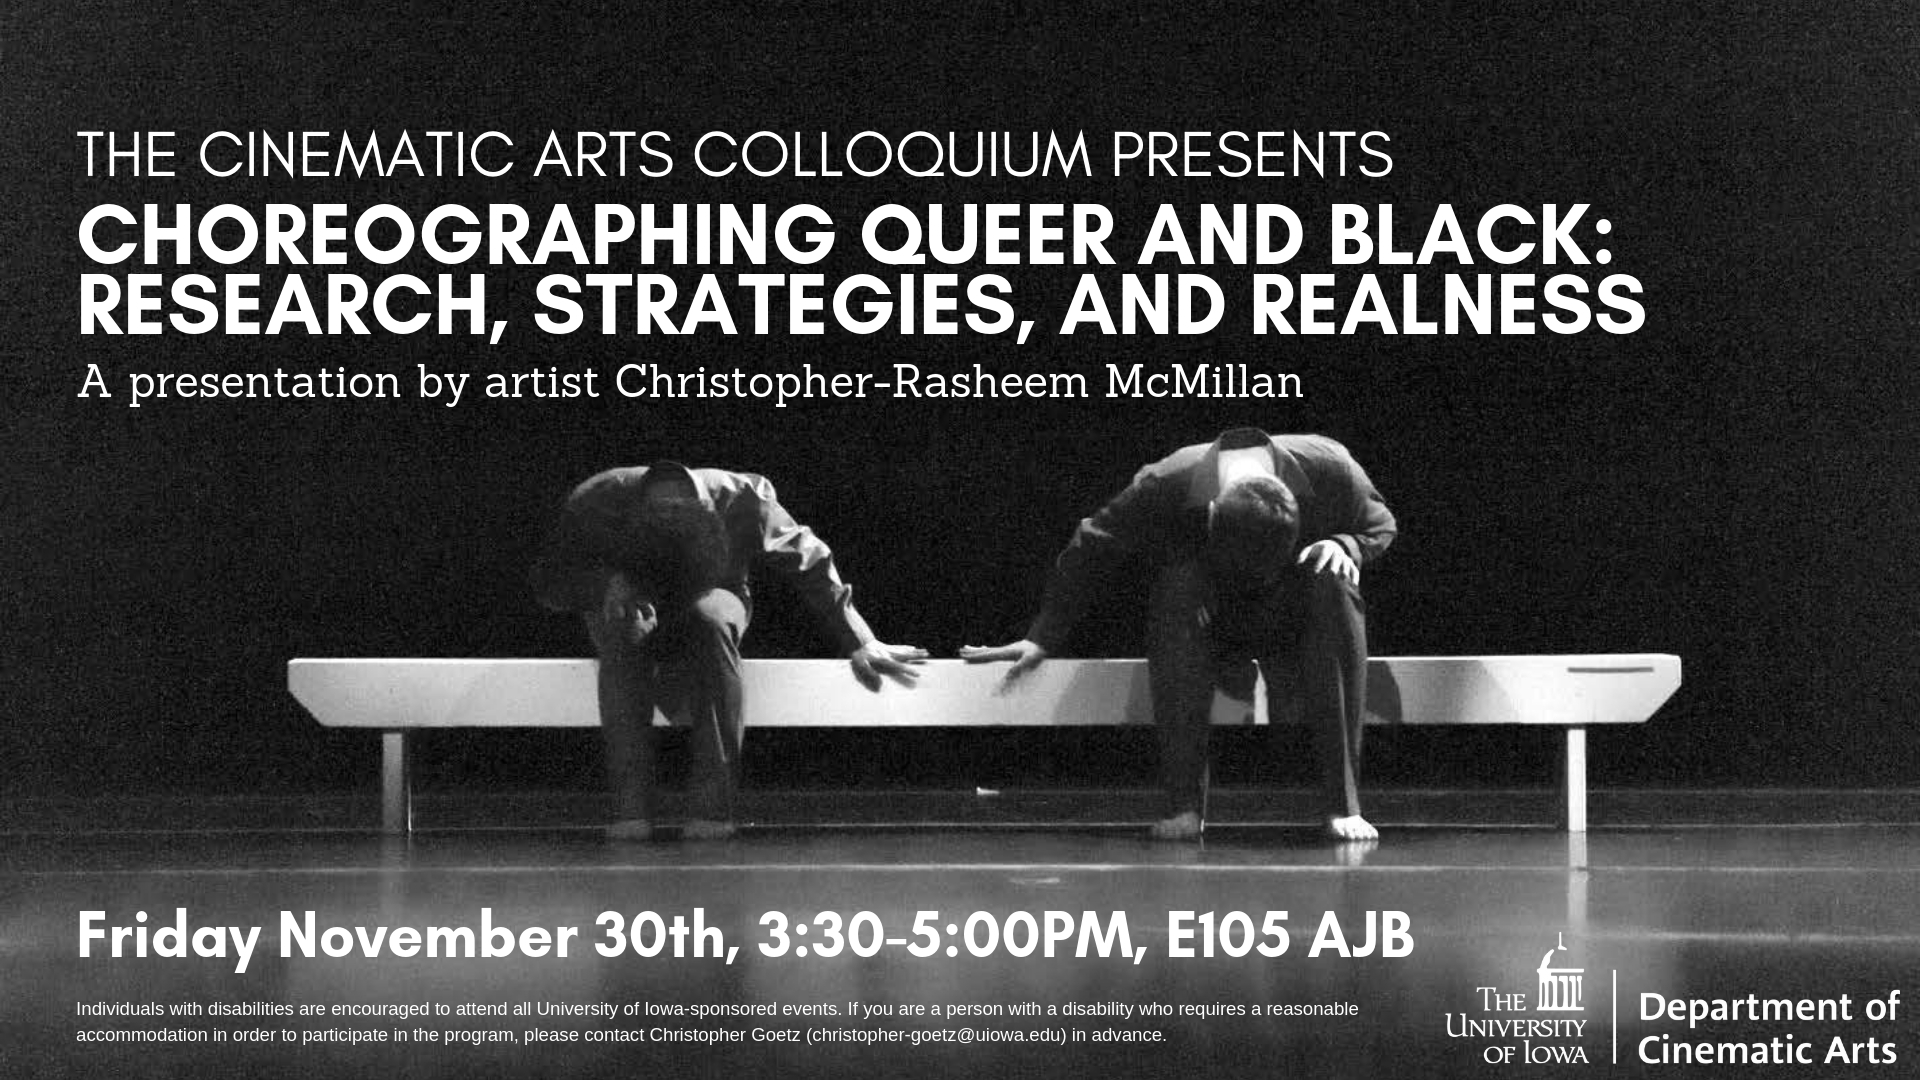 The Cinematic Arts Colloquium Presents CHOREOGRAPHING QUEER AND BLACK: RESEARCH, STRATEGIES, AND REALNESS - A presentation by artist Christopher-Rasheem McMillan, Friday November 30th, 3:30-5:00PM, E105 AJB